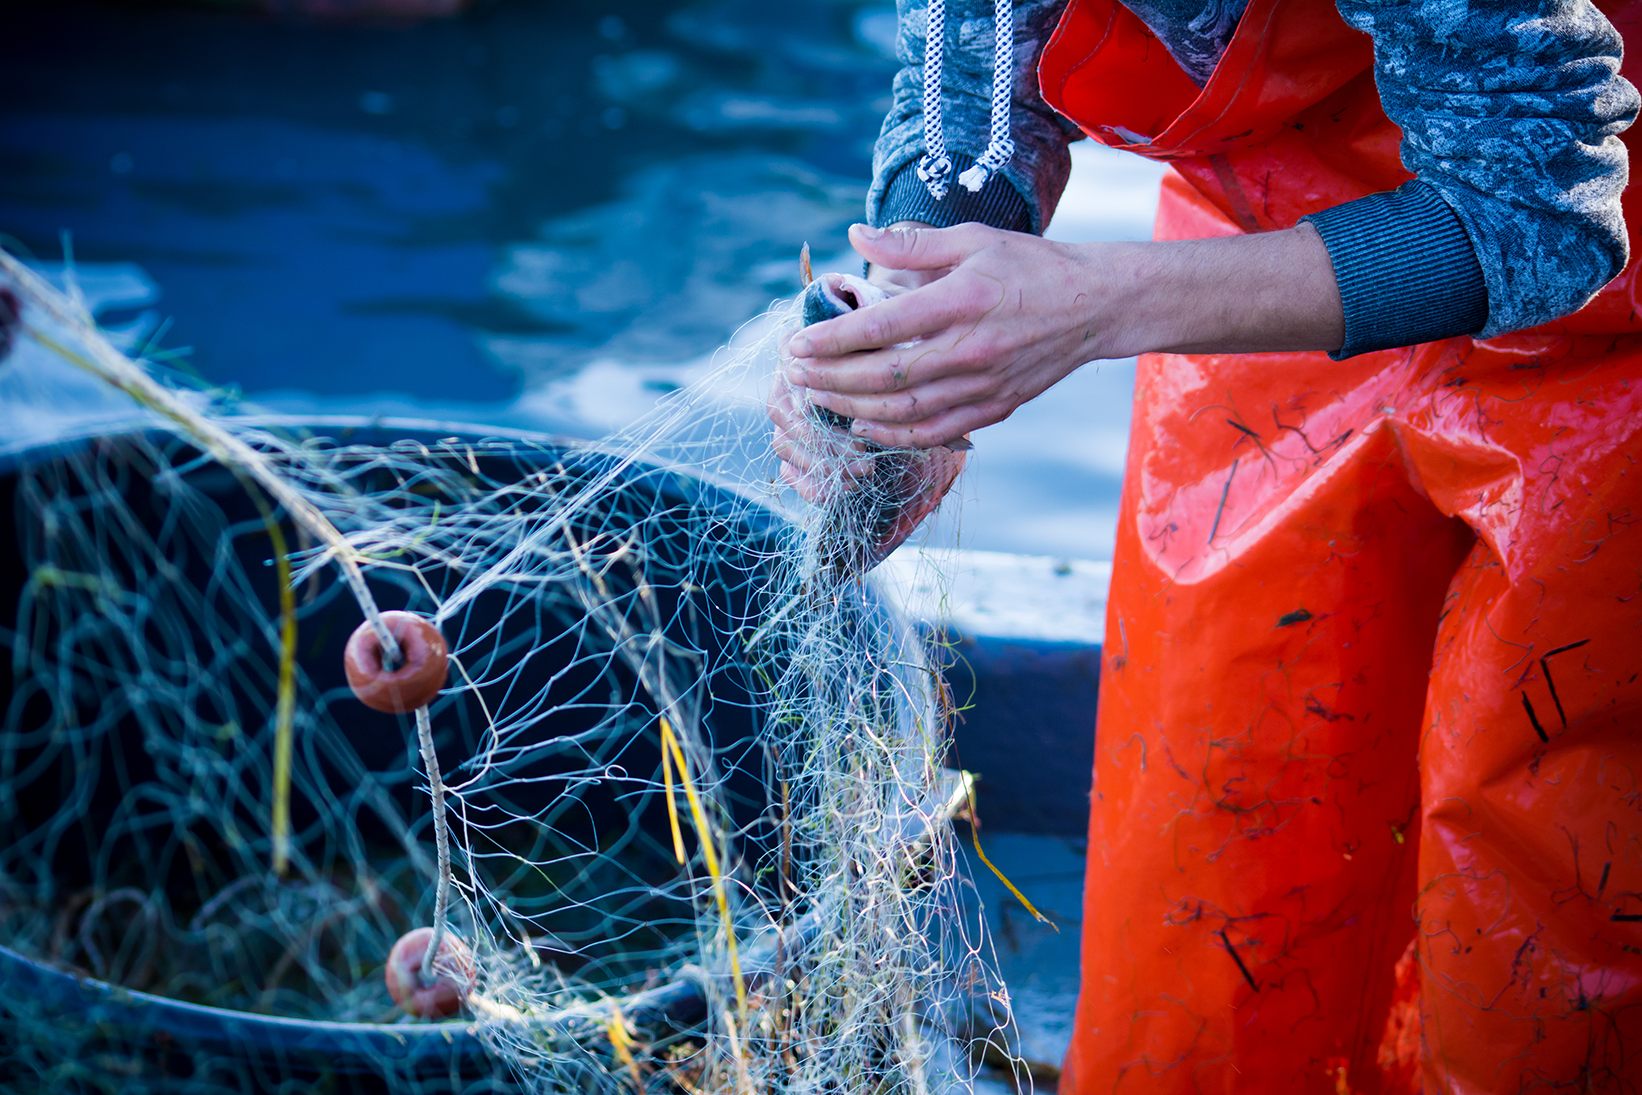 It's in our hands: Sustainable fishing nets